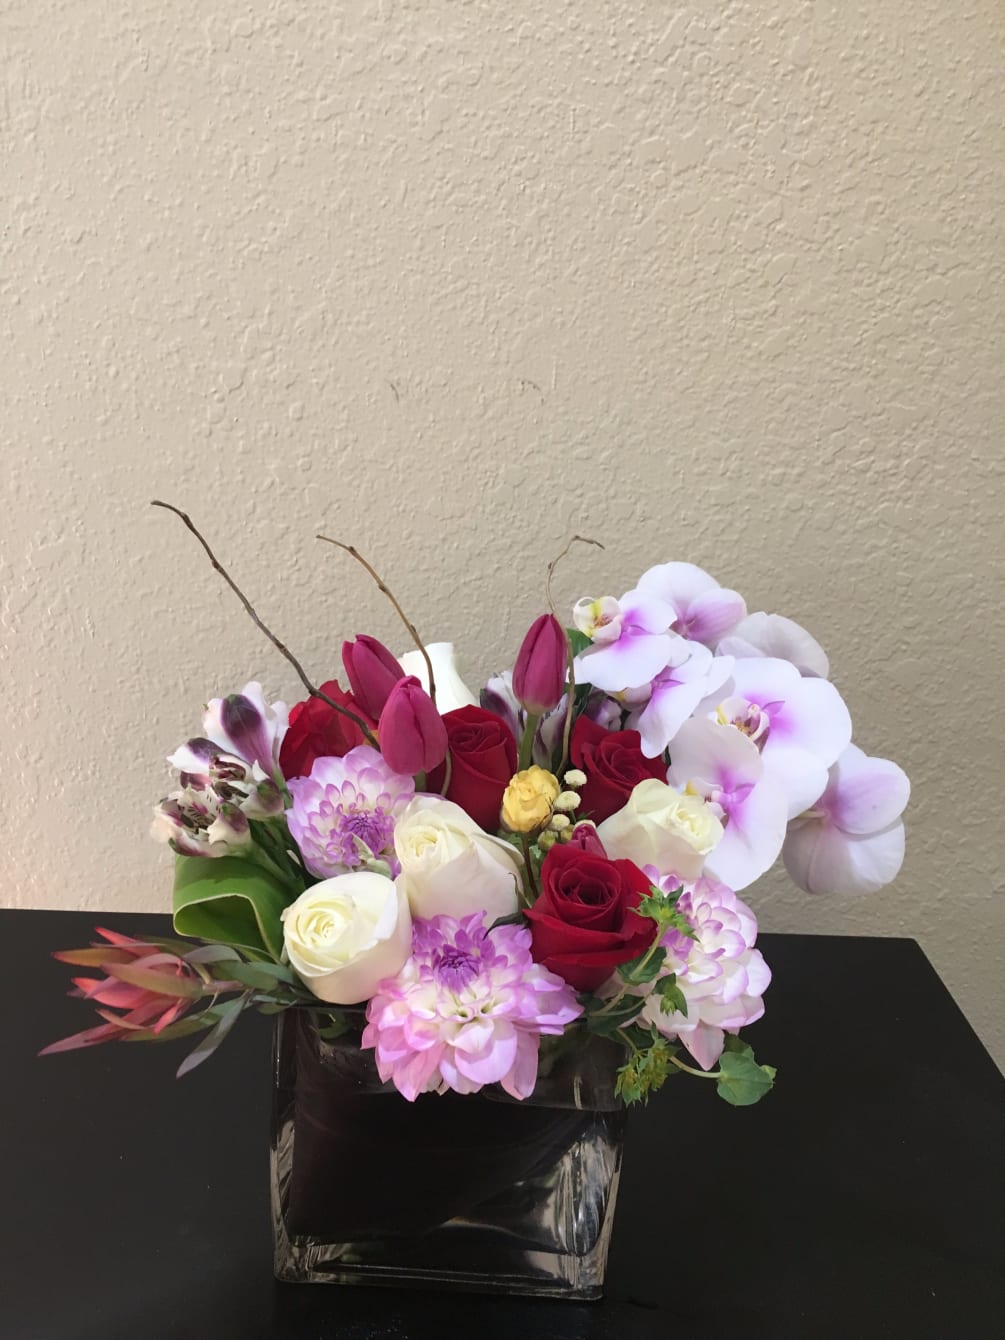 An elegant mix of roses and tulips embraced by beautiful orchids and